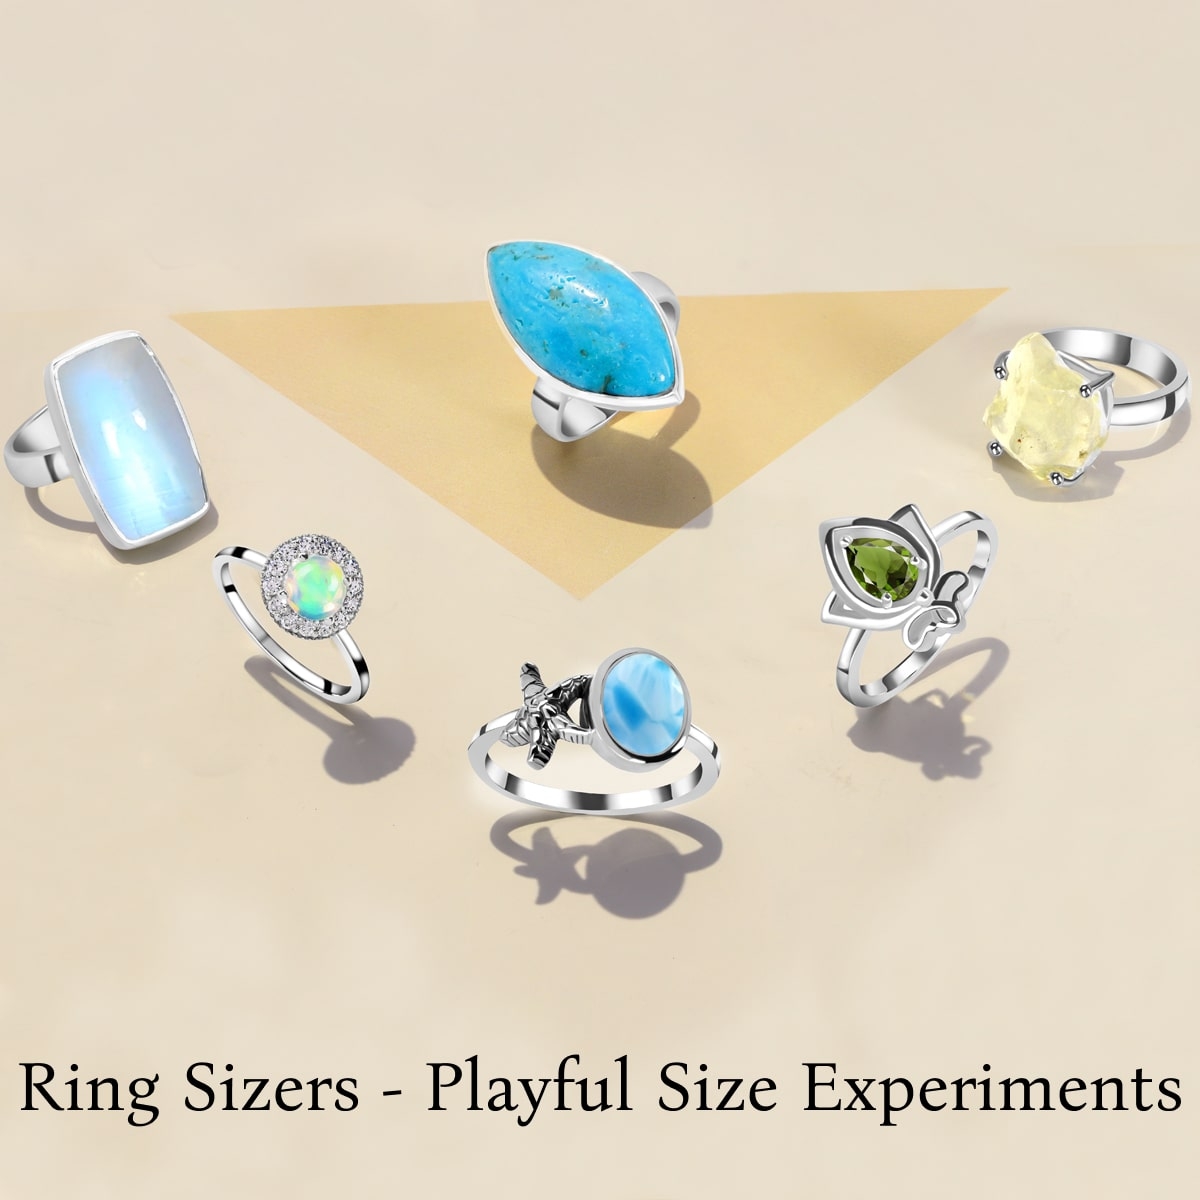 Experiment with Ring Sizers